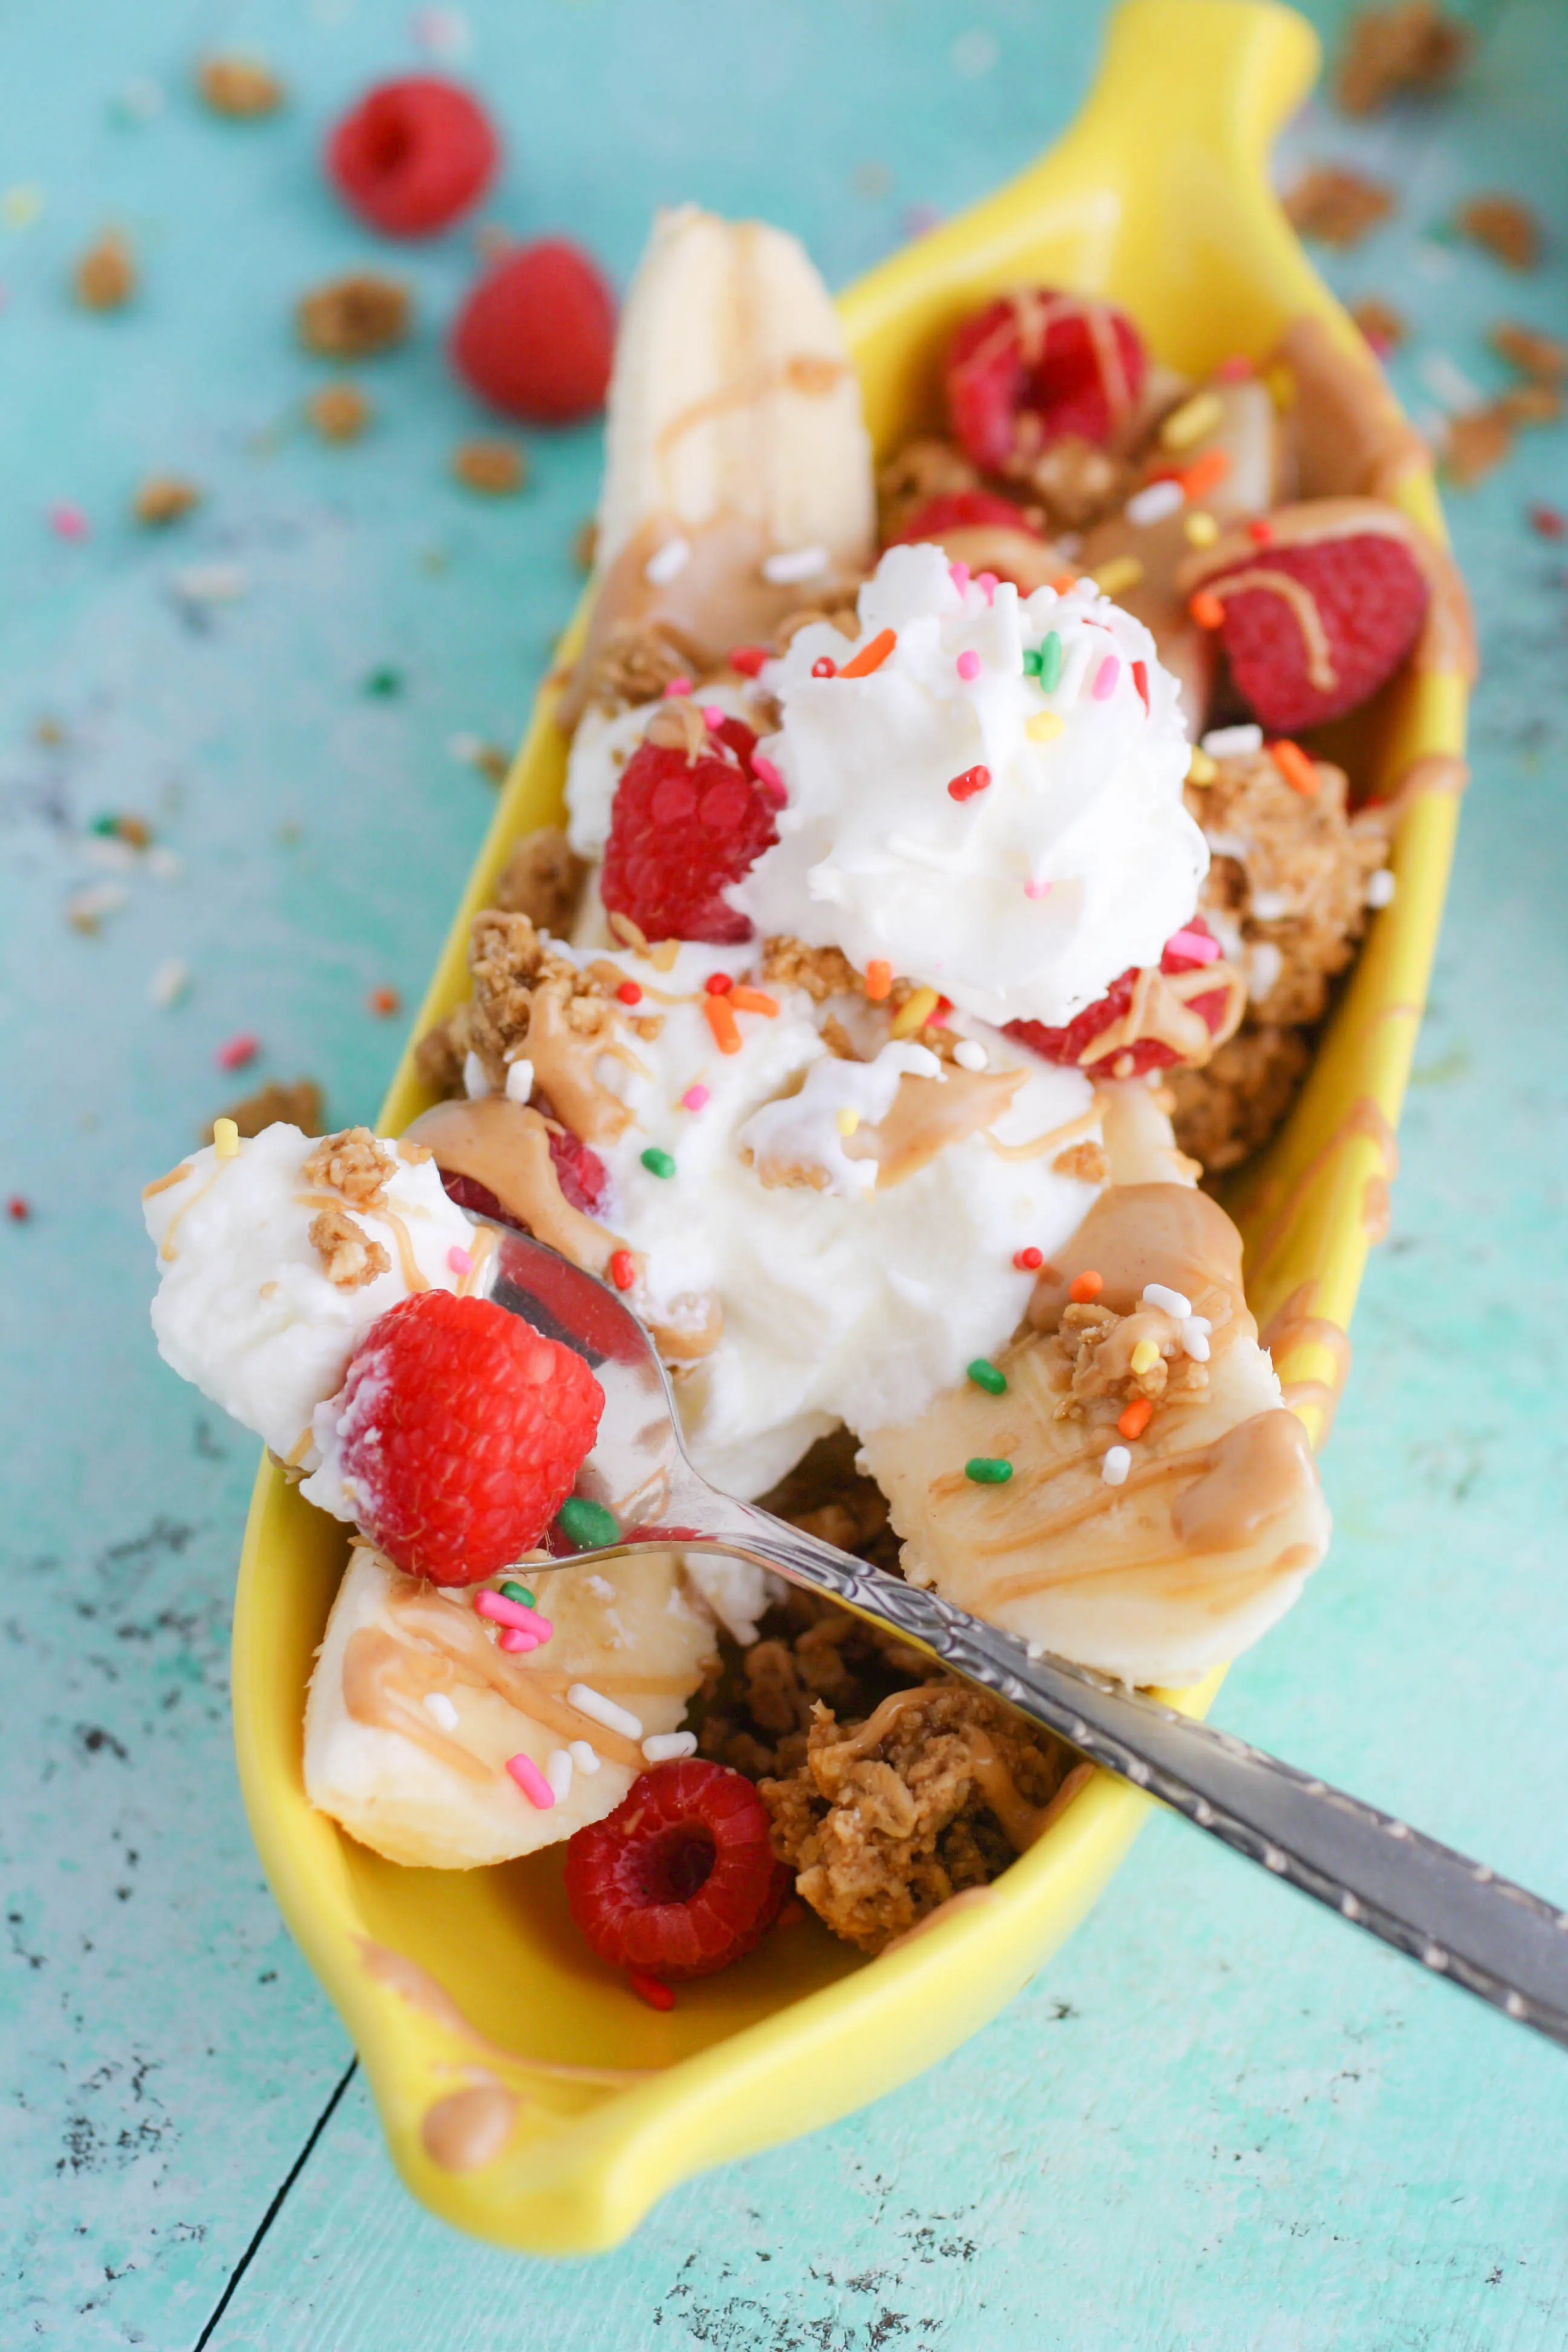 Dig into these “Peanut Butter & Jelly" Breakfast Banana Splits! How fun are these “Peanut Butter & Jelly" Breakfast Banana Splits?